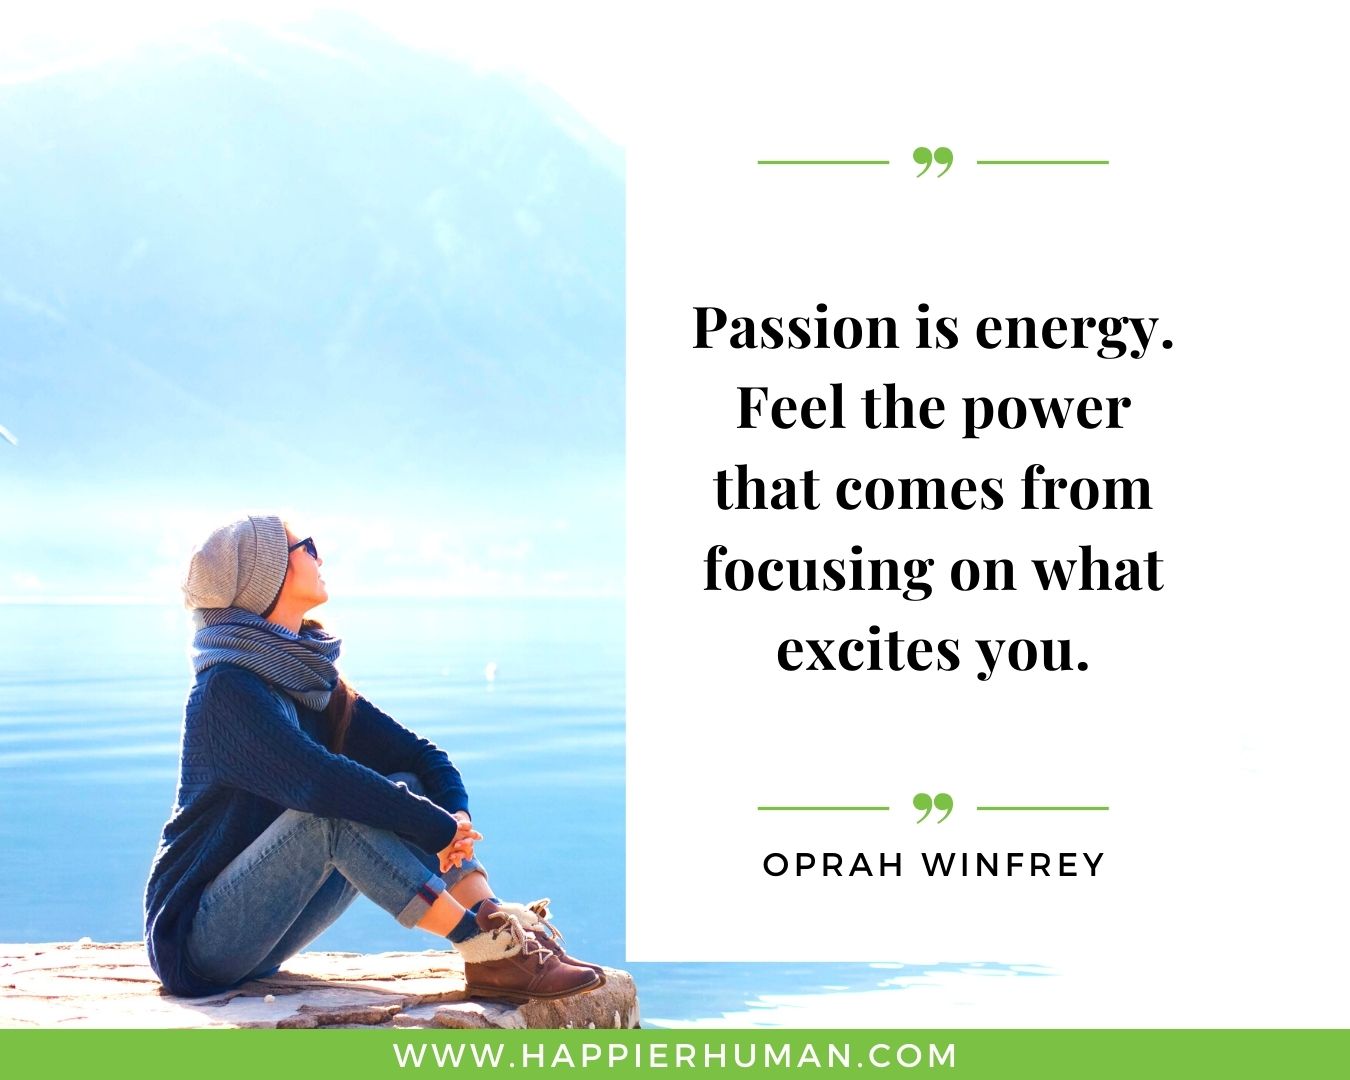 Positive Energy Quotes - “Passion is energy. Feel the power that comes from focusing on what excites you.” - Oprah Winfrey